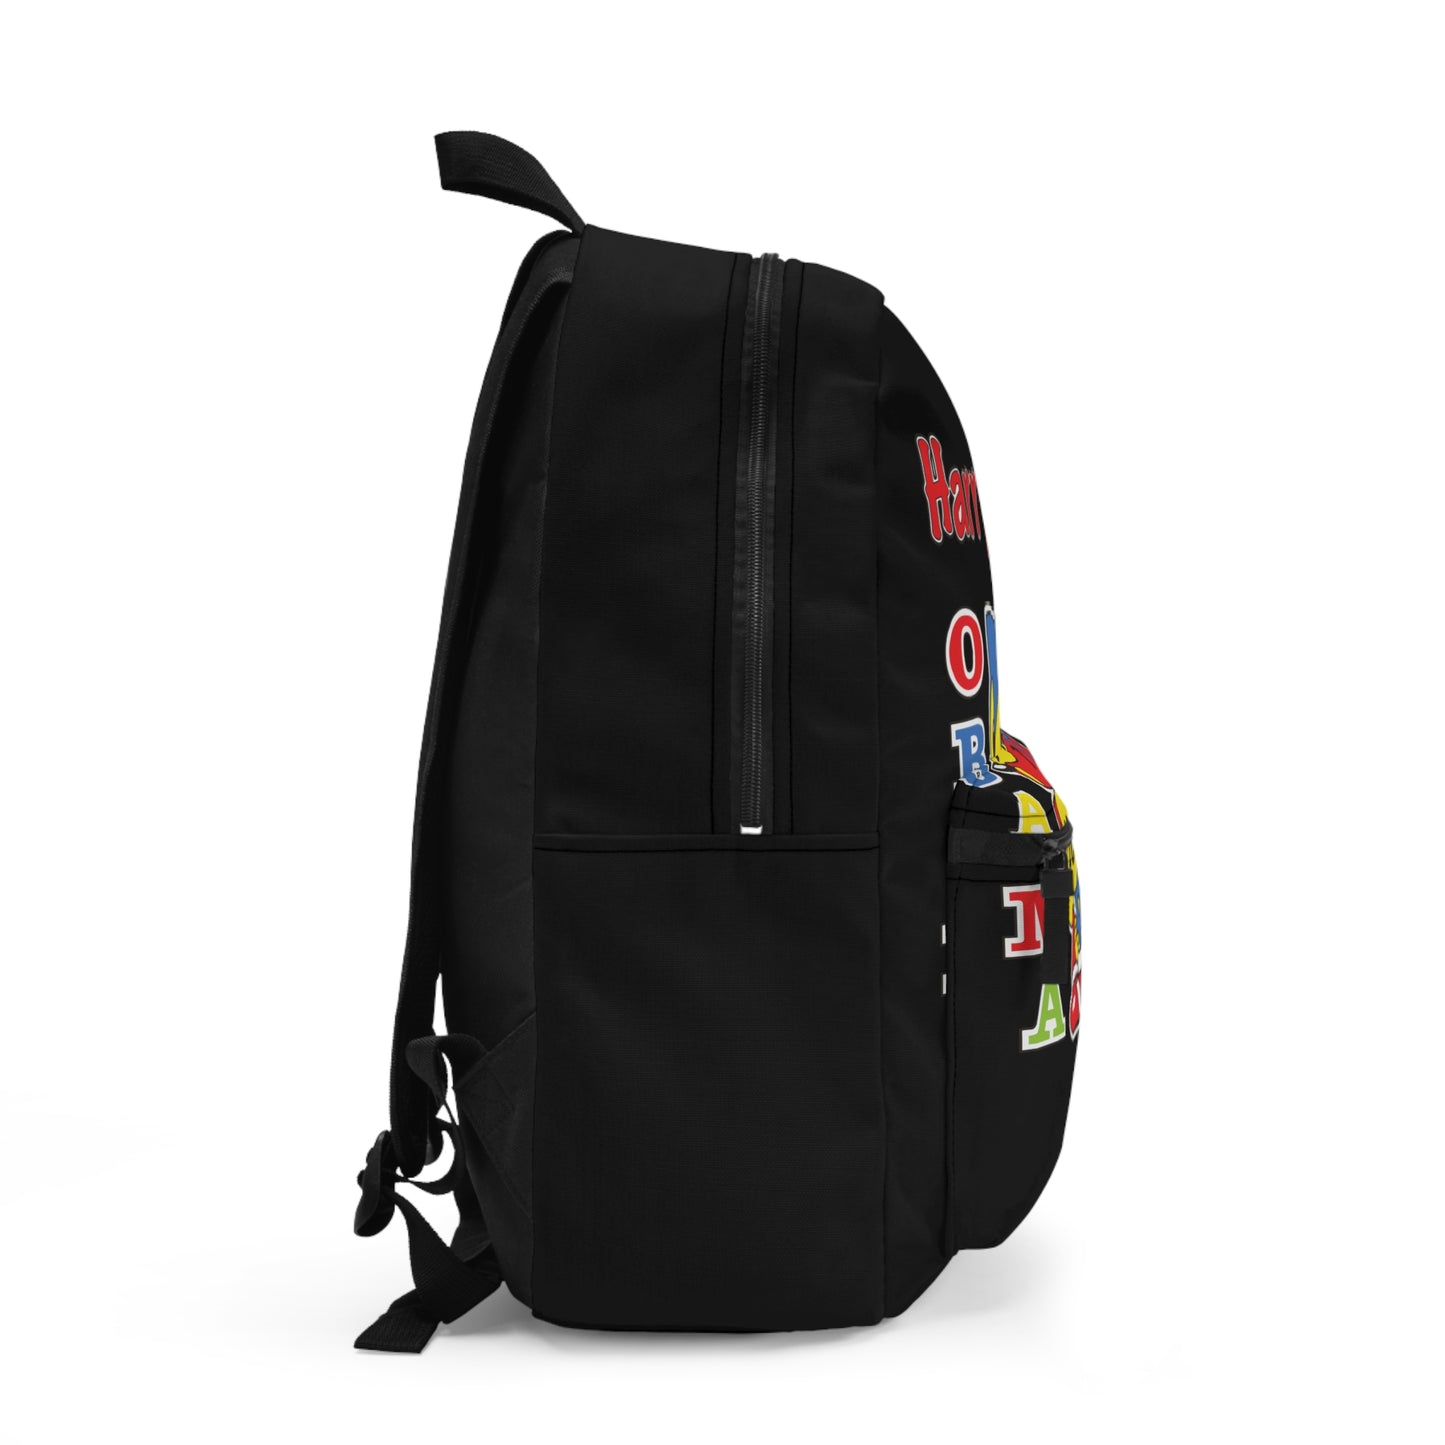 HARRYPOTTEROBAMASONIC10INU Official Backpack